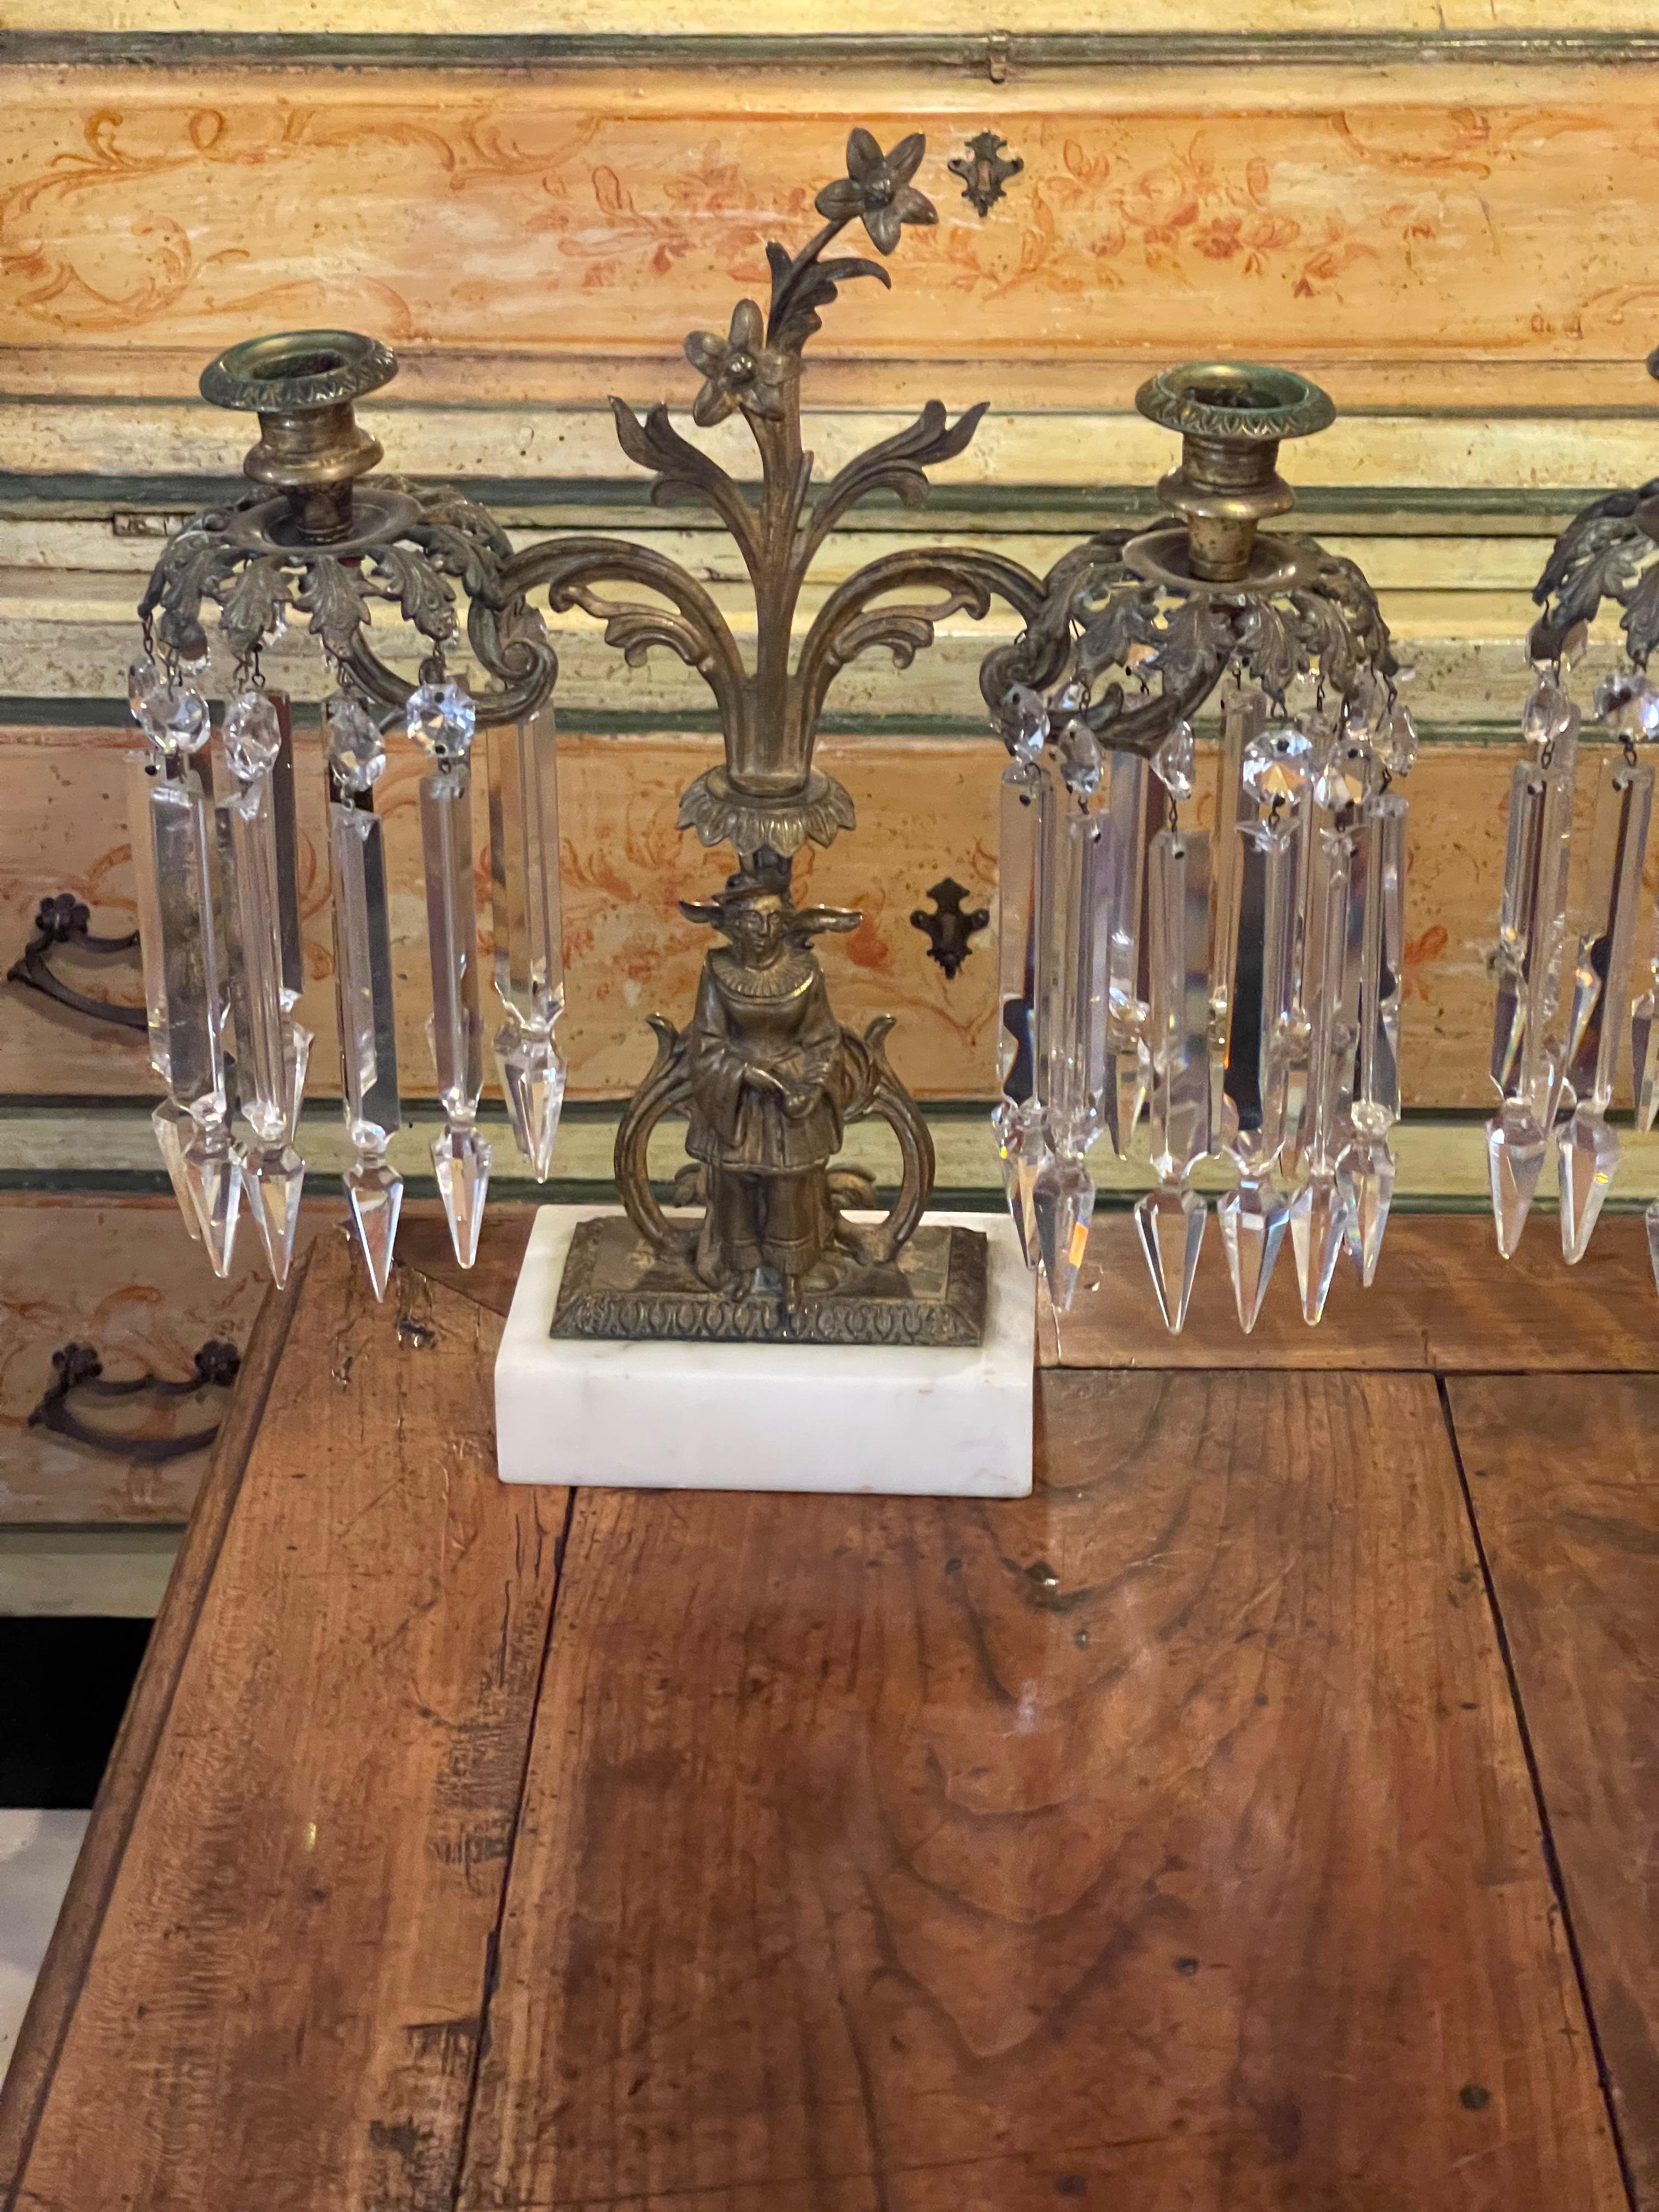 Mid 19th Century Dutch Bronze Crystal Candelabras - a Pair In Good Condition For Sale In Charlottesville, VA